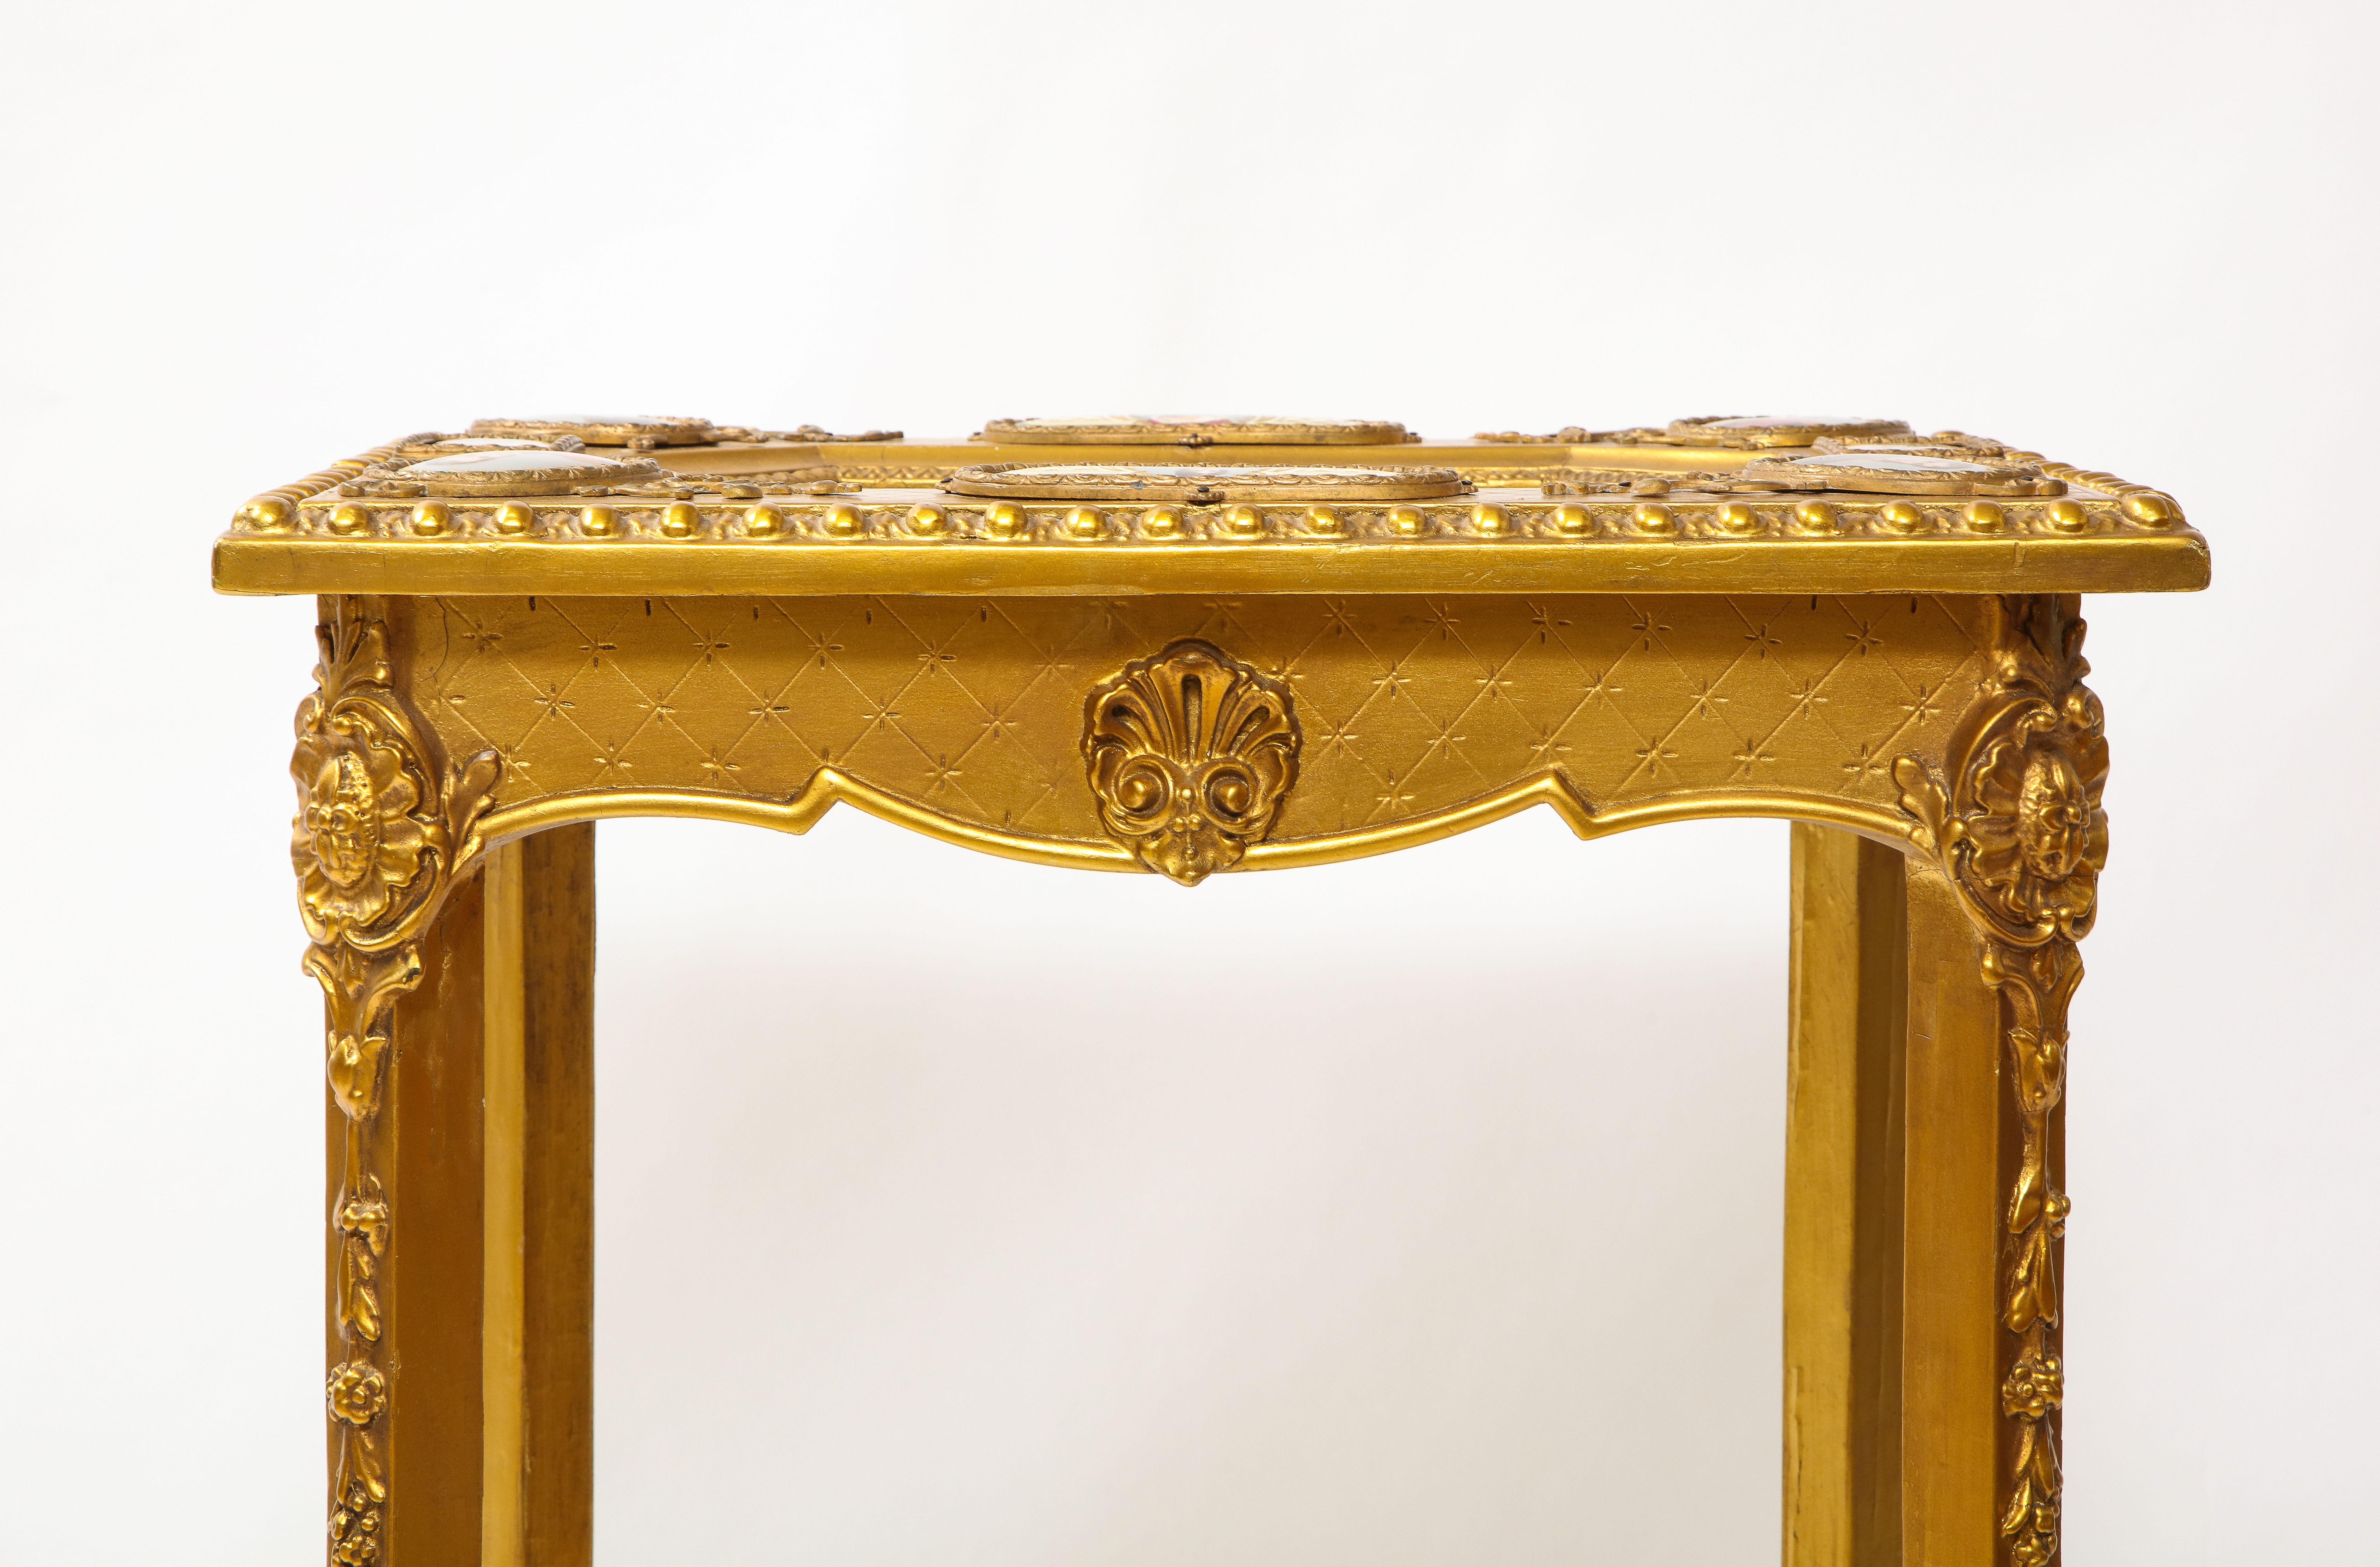 19th C. Napoleonic Royal Vienna Giltwood Side Table w/ Inlaid Porcelain Plaques For Sale 12